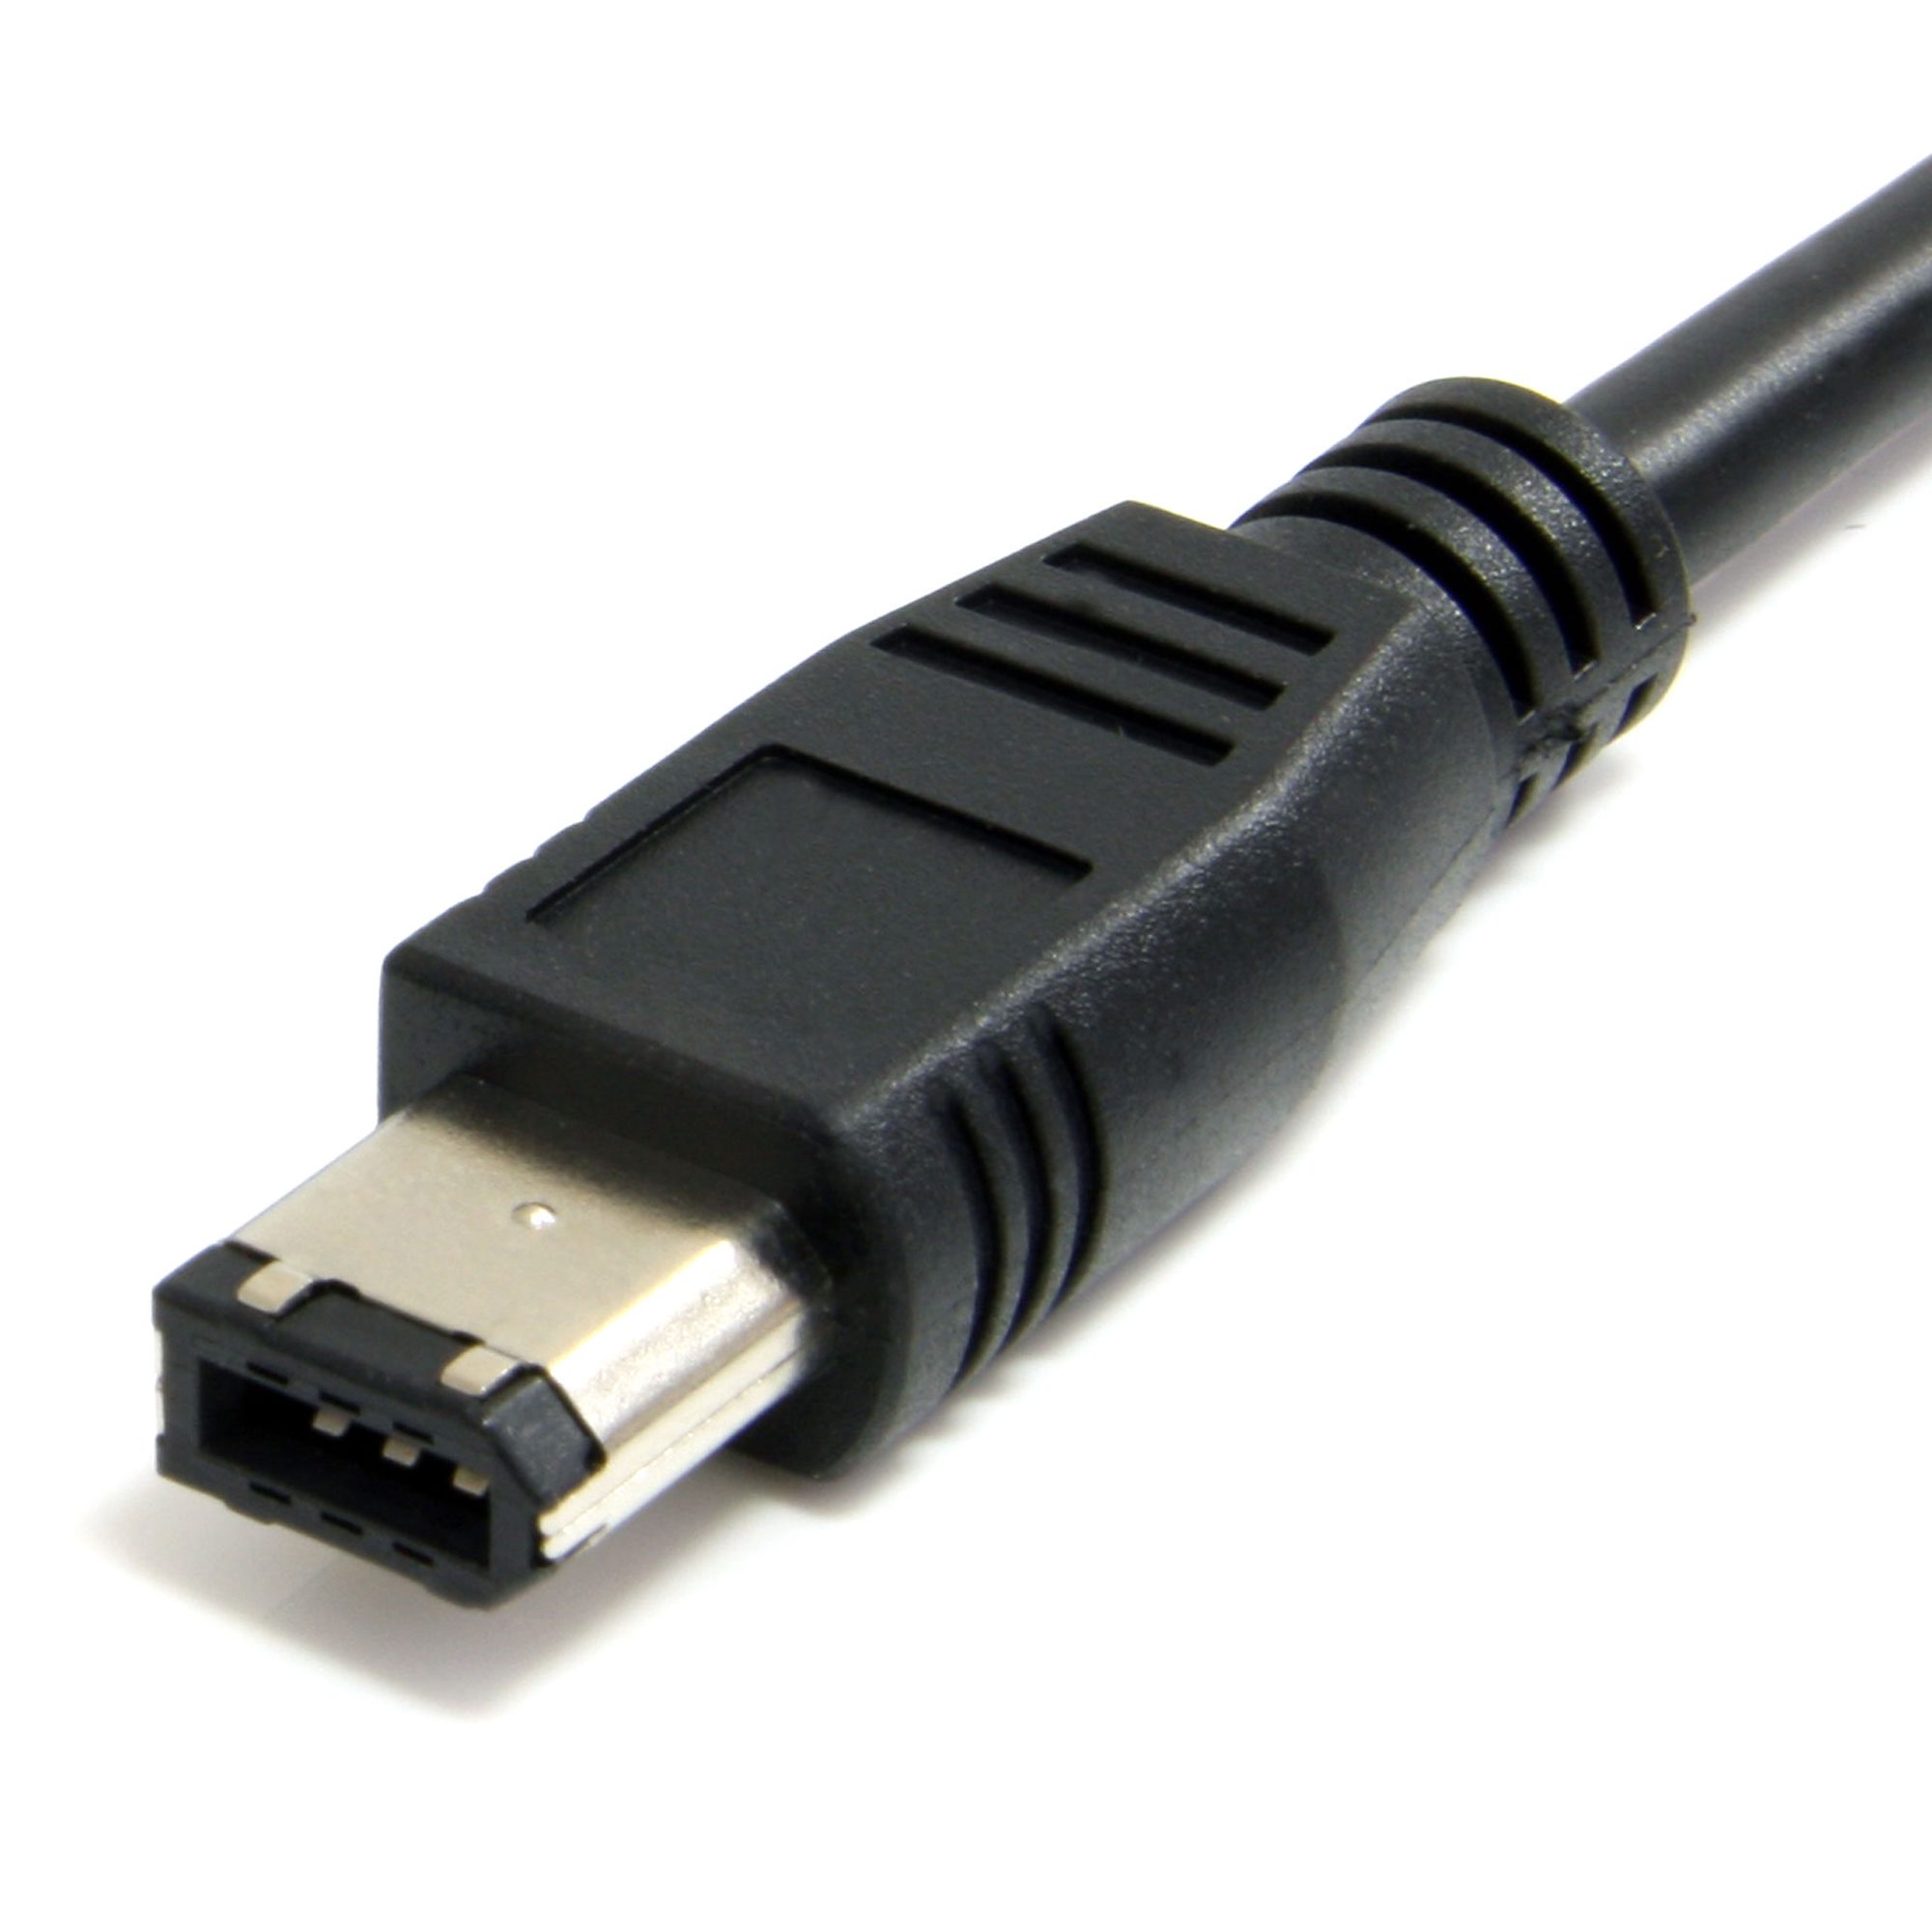 Professional Cable 139494-06 FireWire 9P-4P Cable 6-Feet